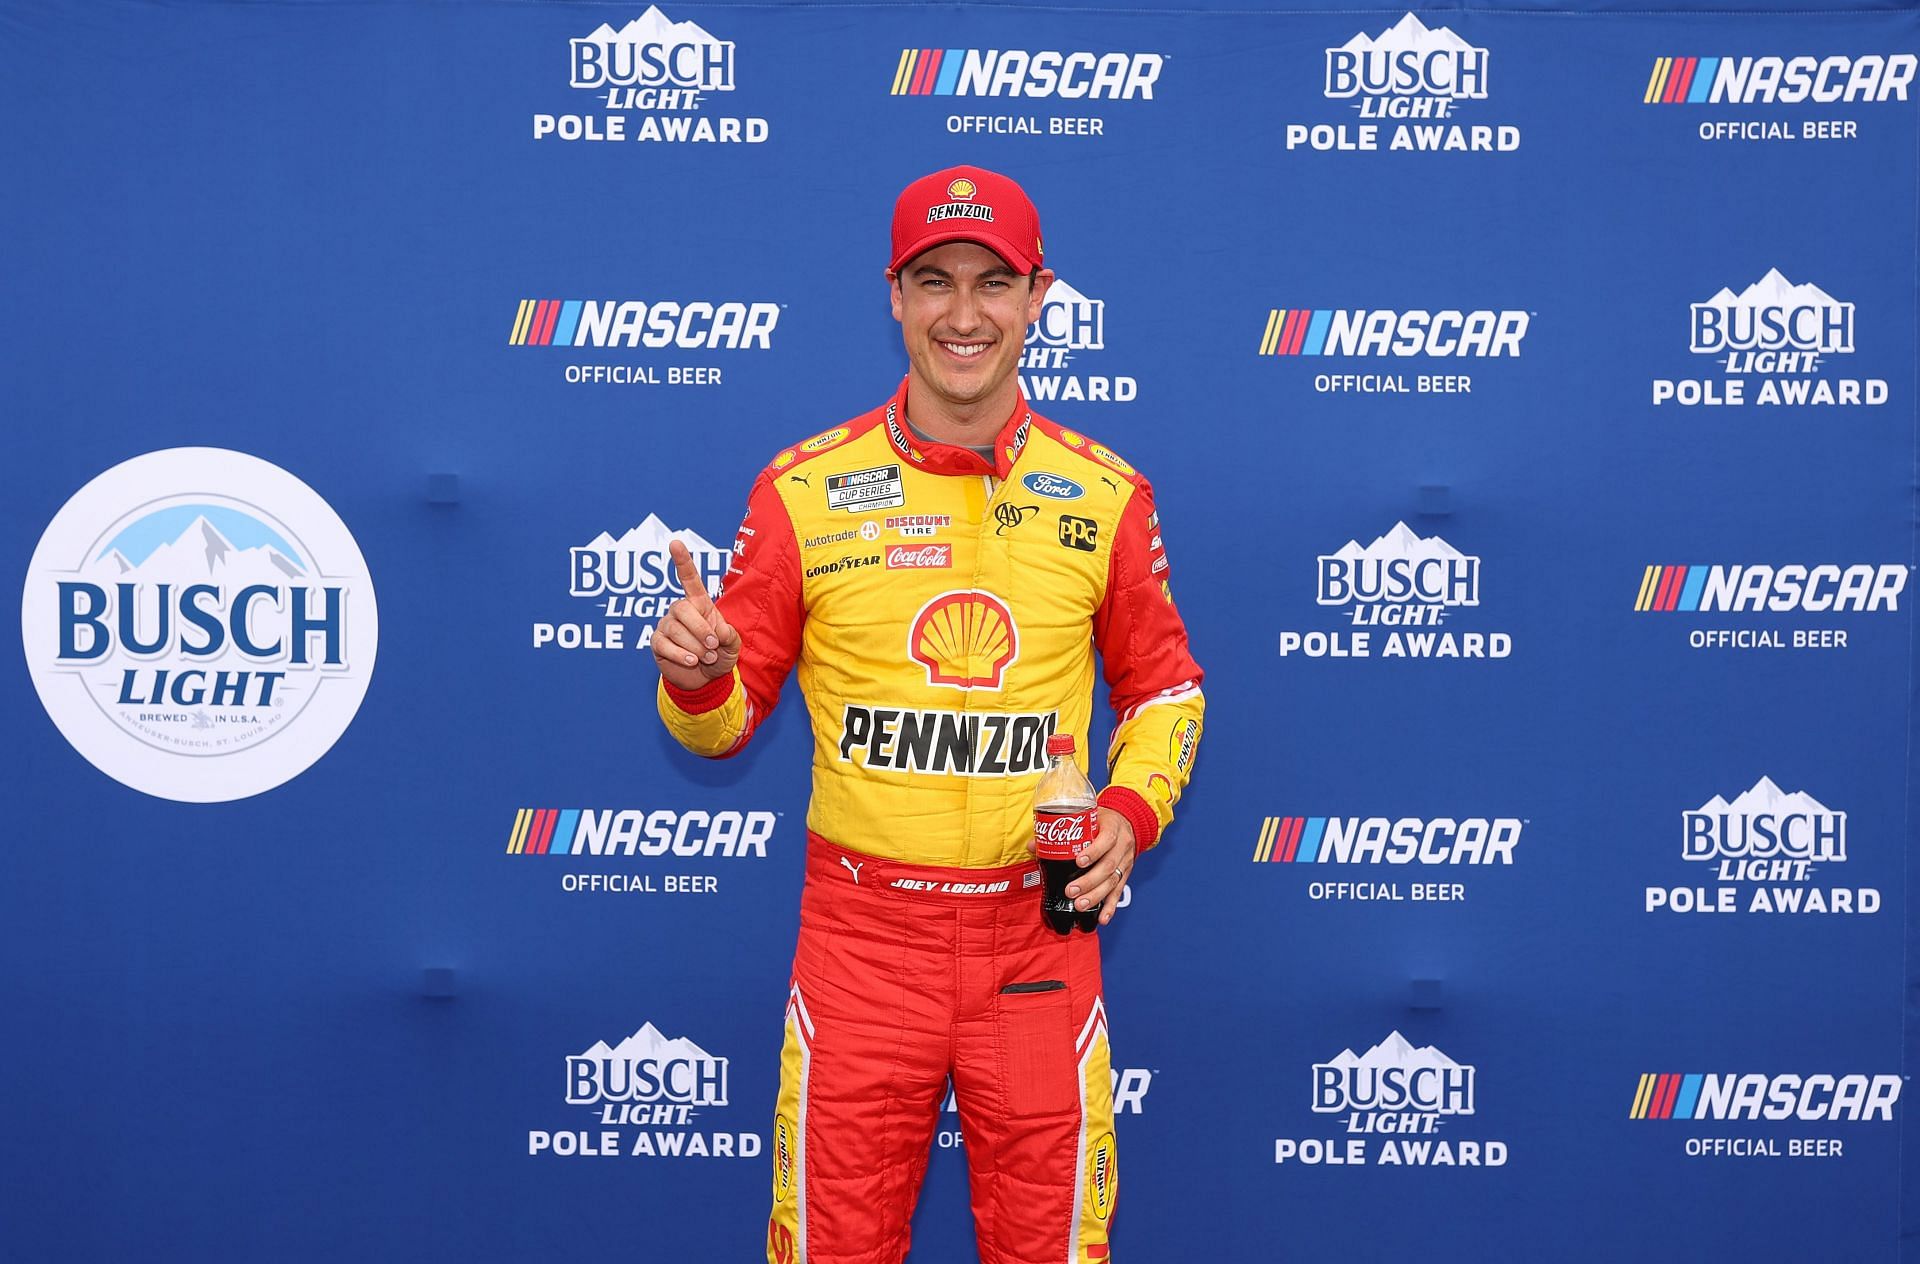 Joey Logano poses for photos after winning the pole award during qualifying for the NASCAR Cup Series Goodyear 400 at Darlington Raceway (Photo by James Gilbert/Getty Images)